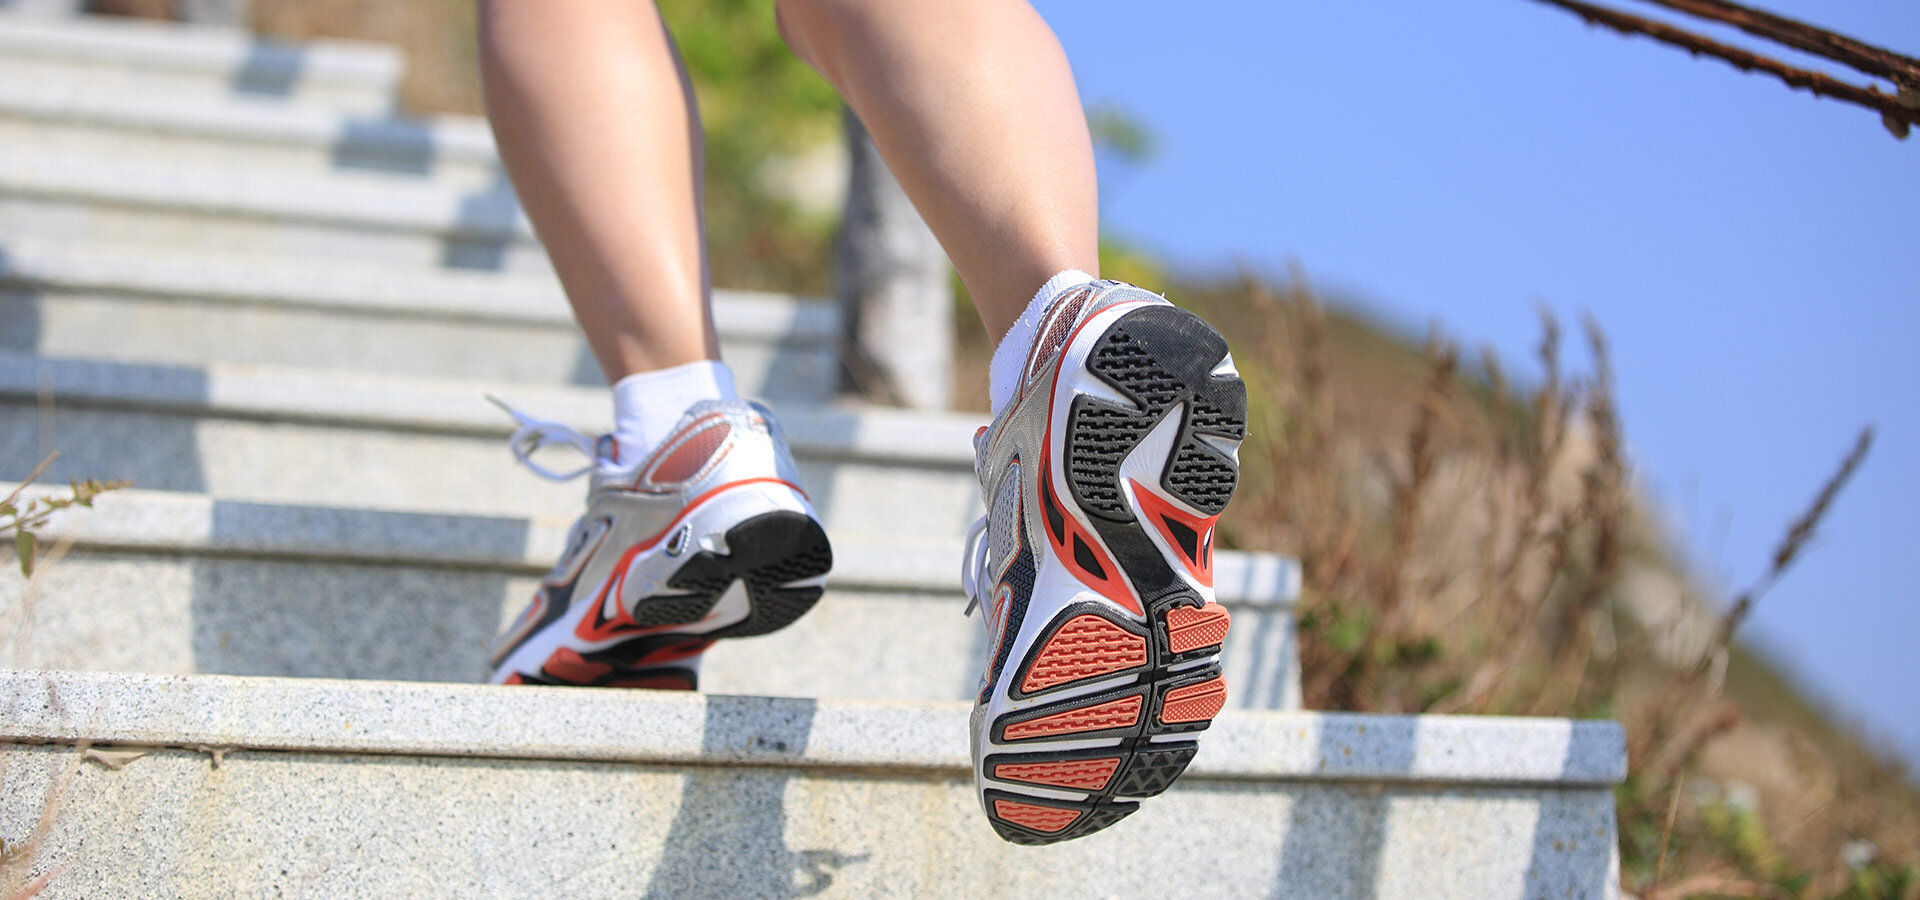 Stair climbing exercises